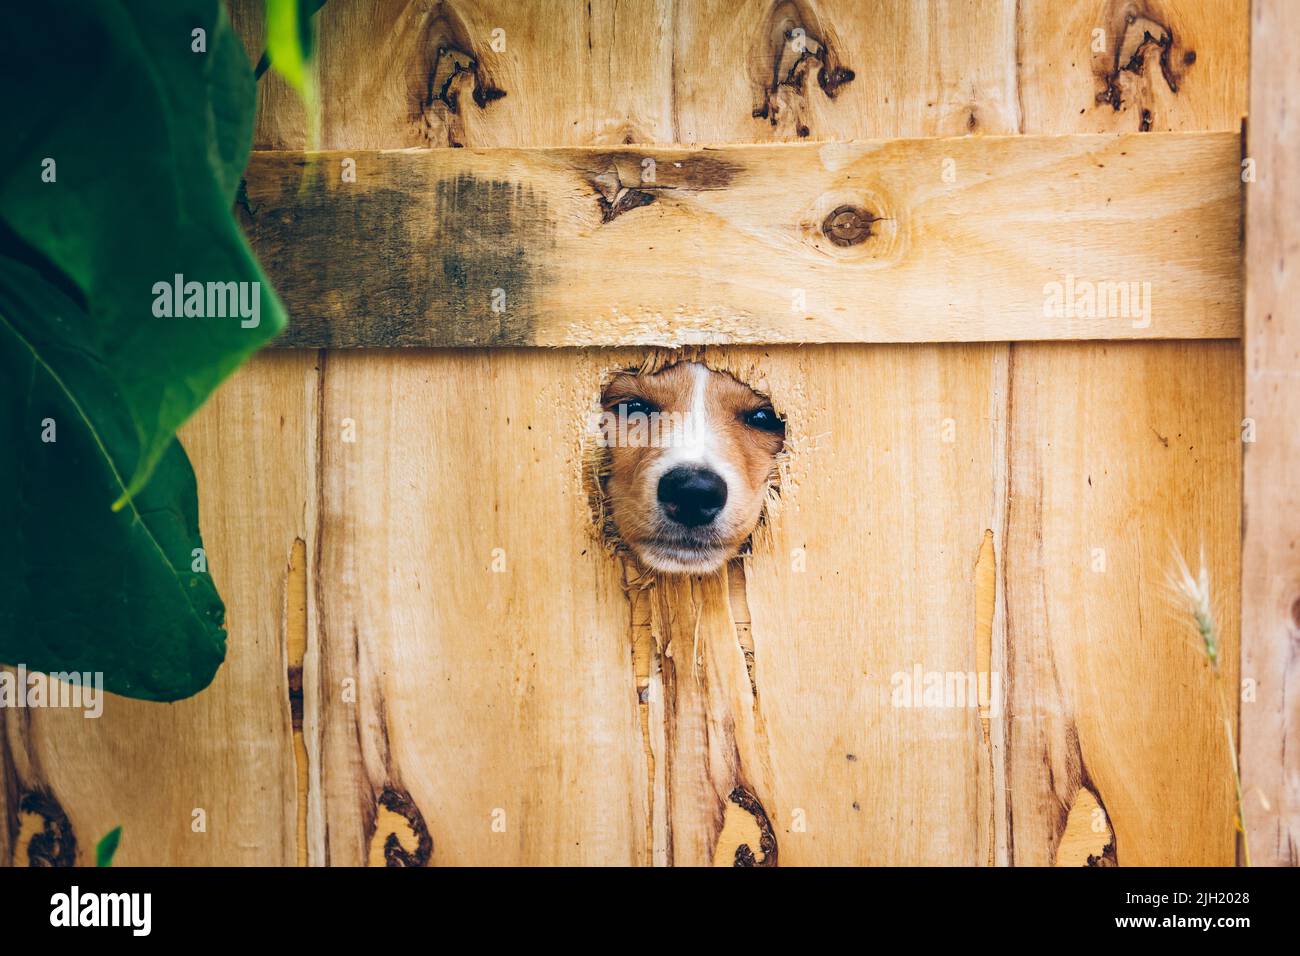 The dog gnawed a hole in the fence to get out. Ukrainian volunteers are engaged in rescuing animals in Ukraine. Volunteers help Ukrainian pets. Stock Photo